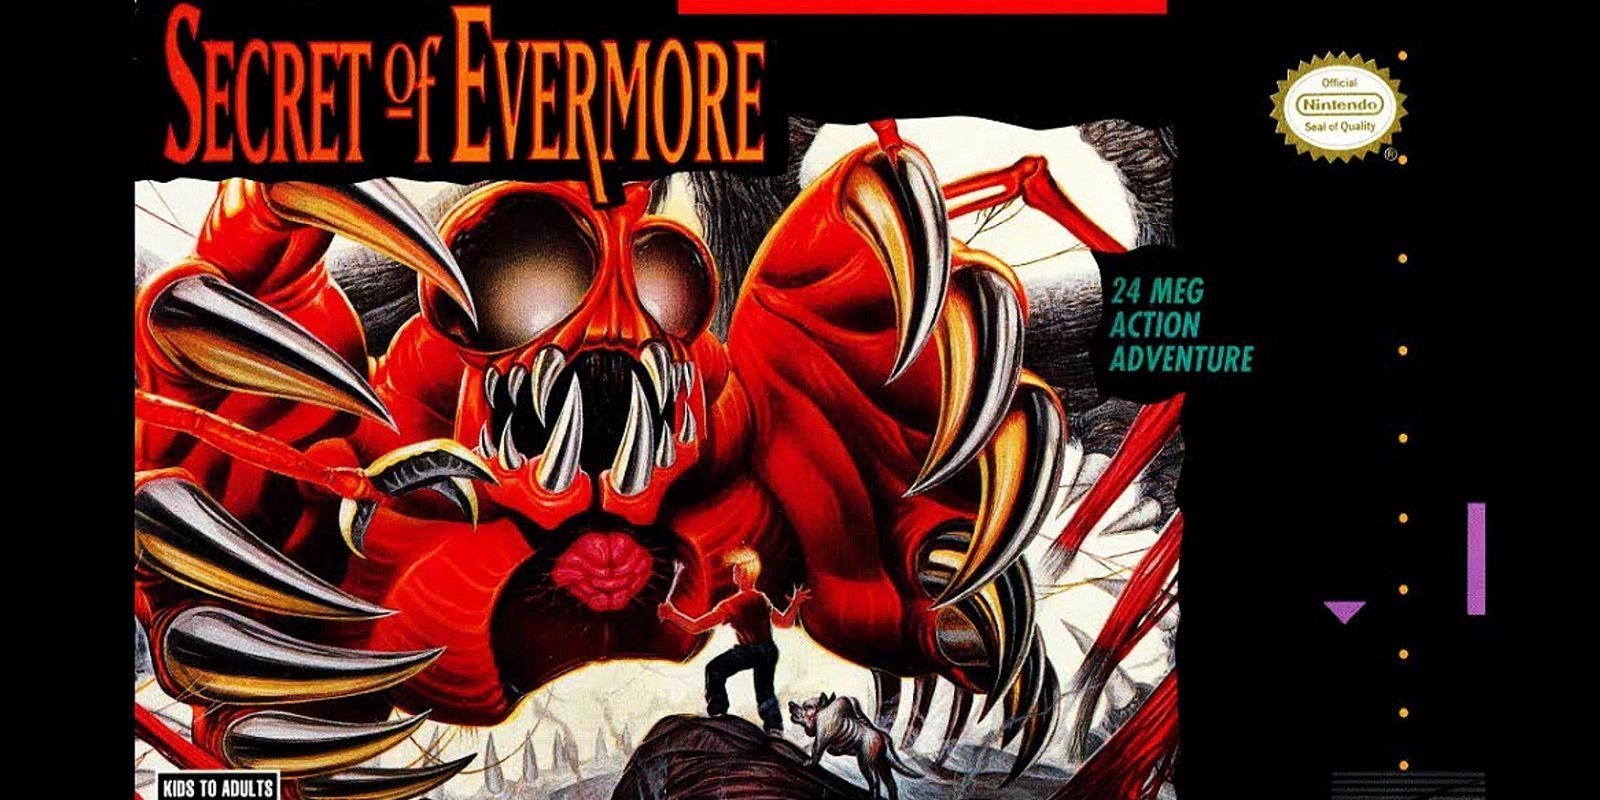 download secret of evermore remake ps4